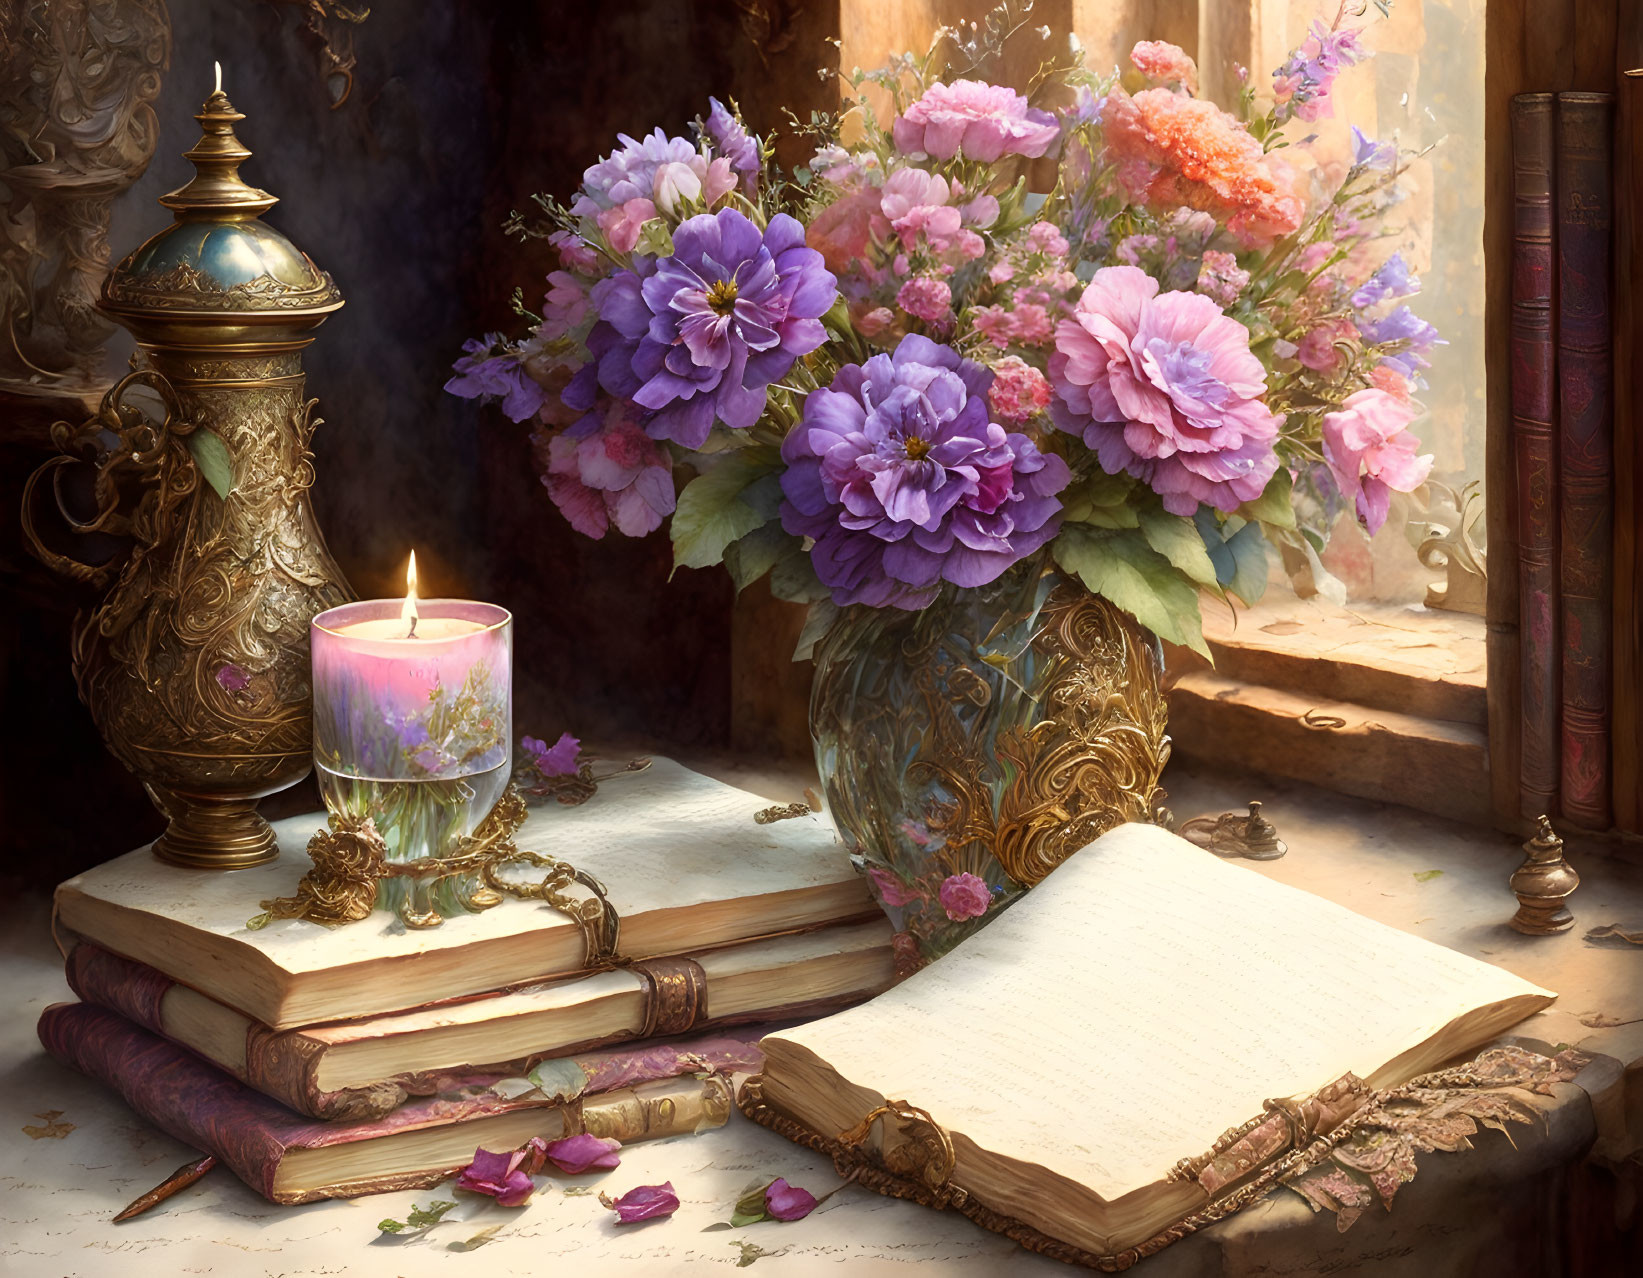 Classic Still Life with Open Book, Lit Candle, Vase, and Vintage Books